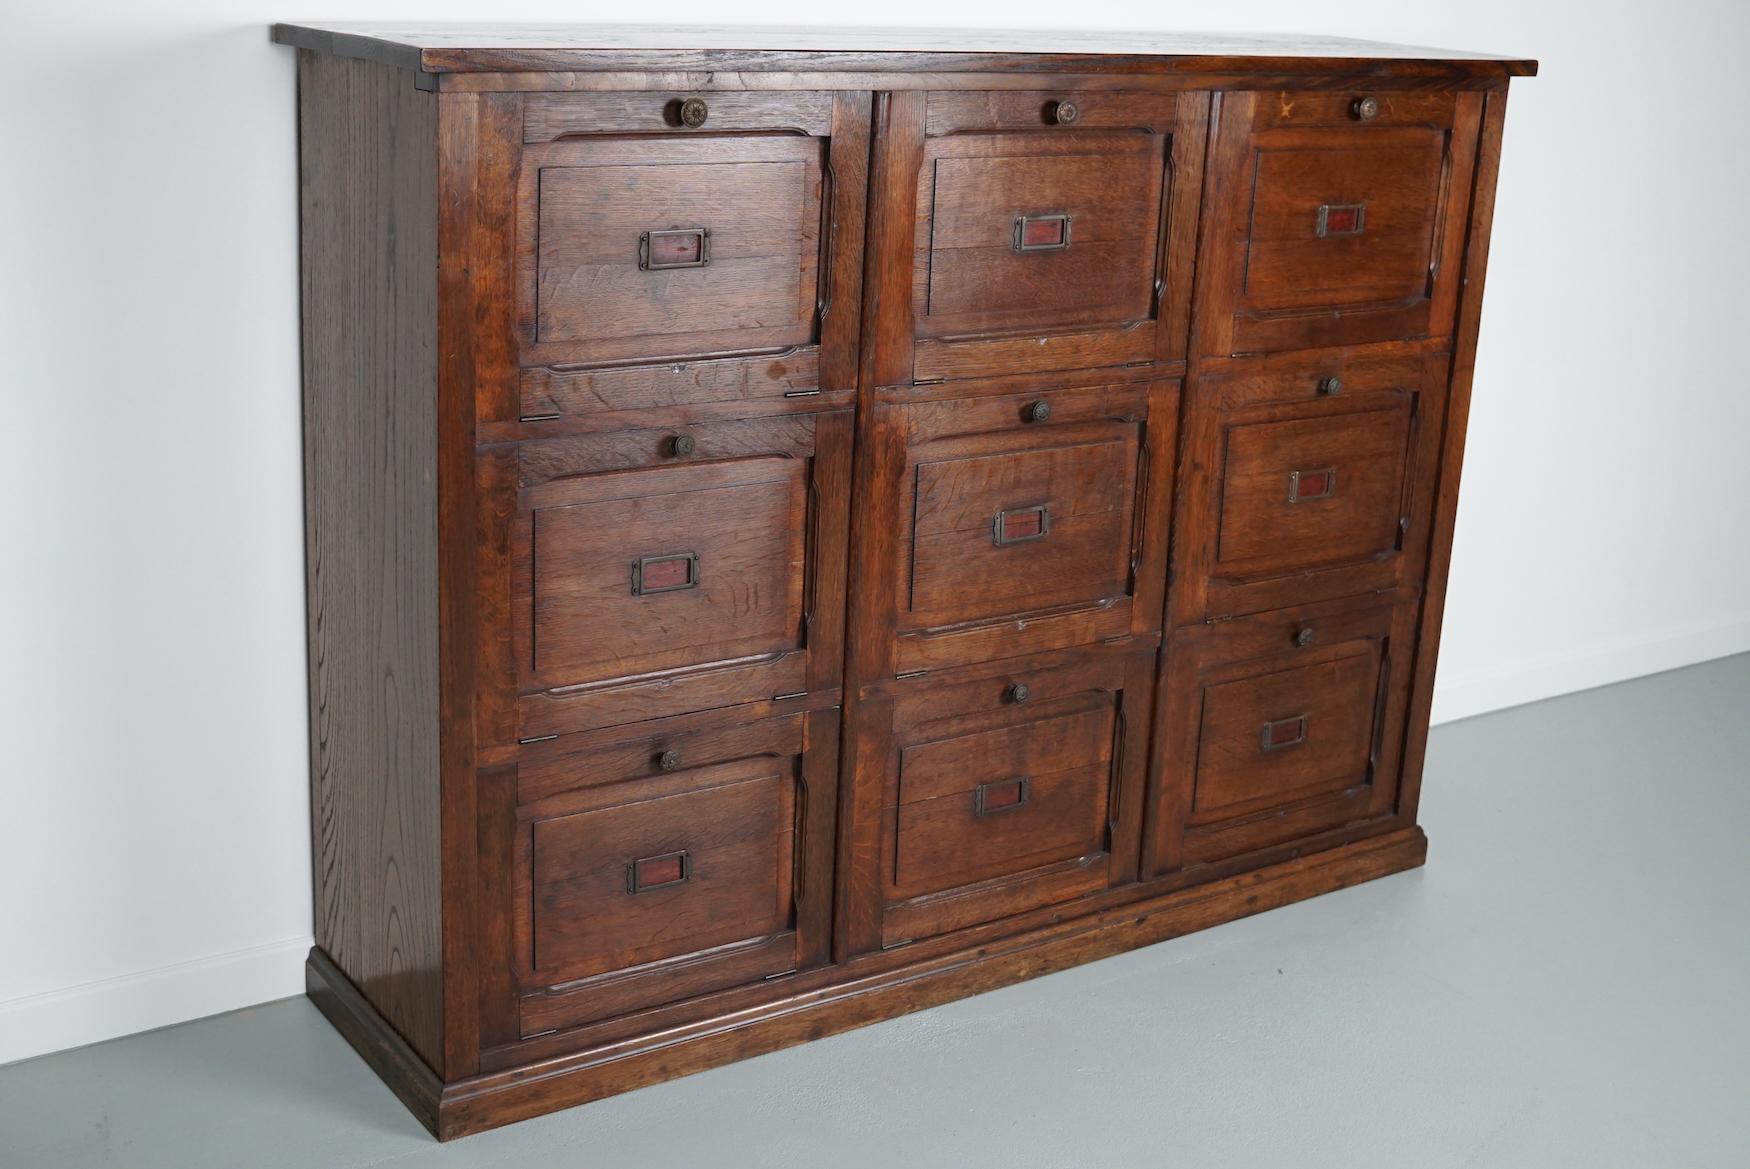 European Antique French Oak Apothecary / Filing Cabinet Folding Doors, Late 19th Century